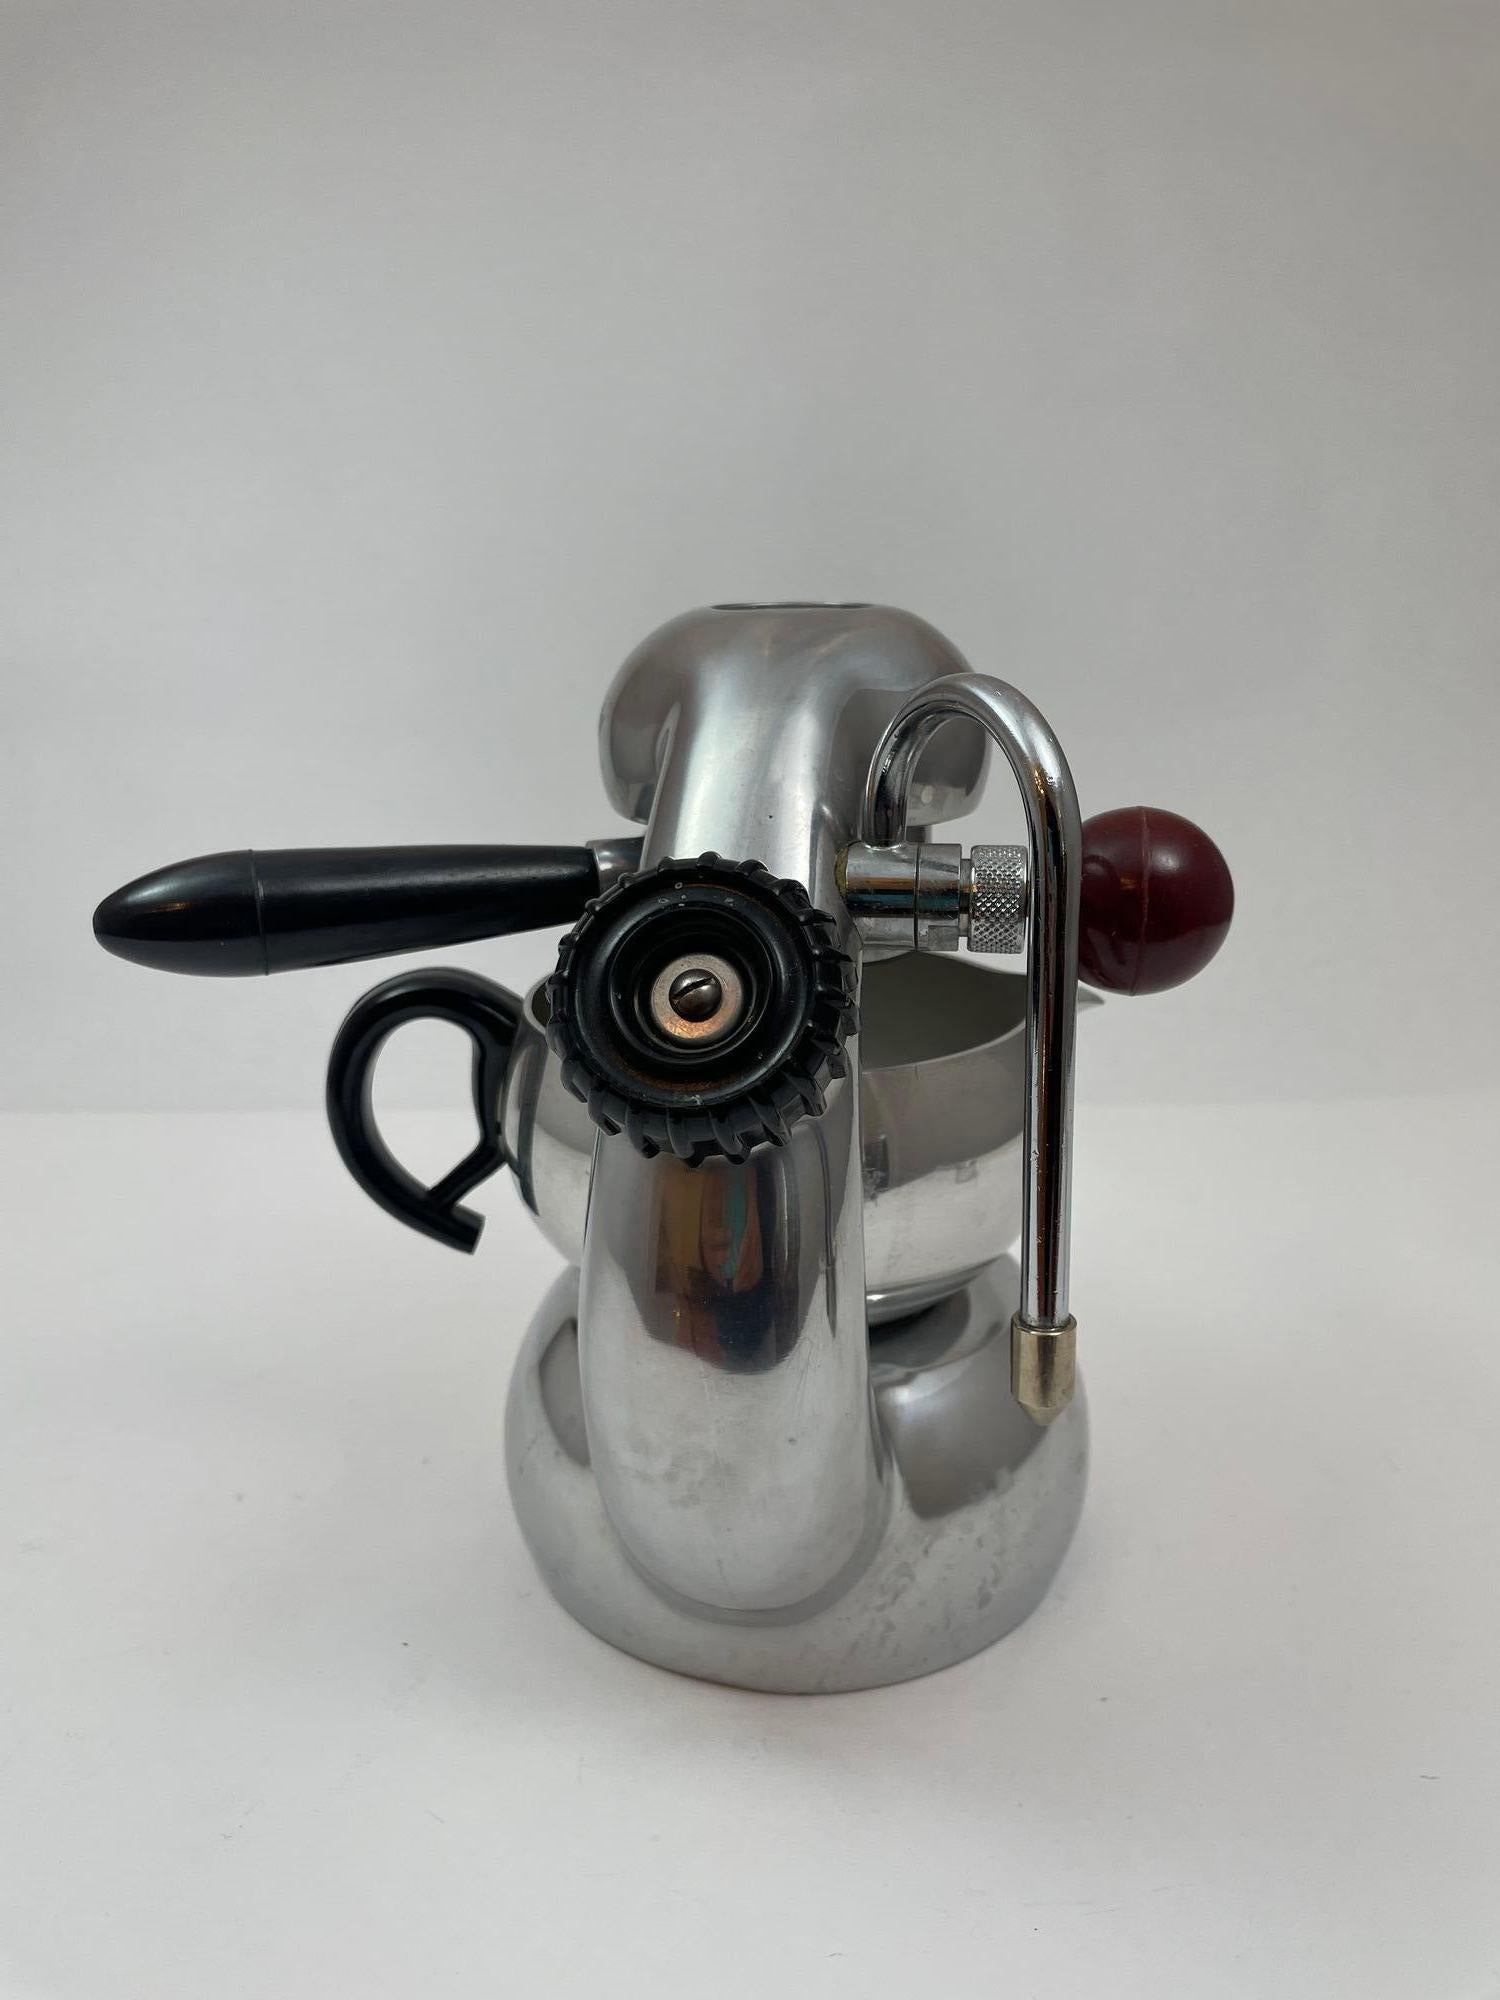 Vintage Atomic Coffee Maker by Giordano Robbiati Italy 1950s For Sale 2